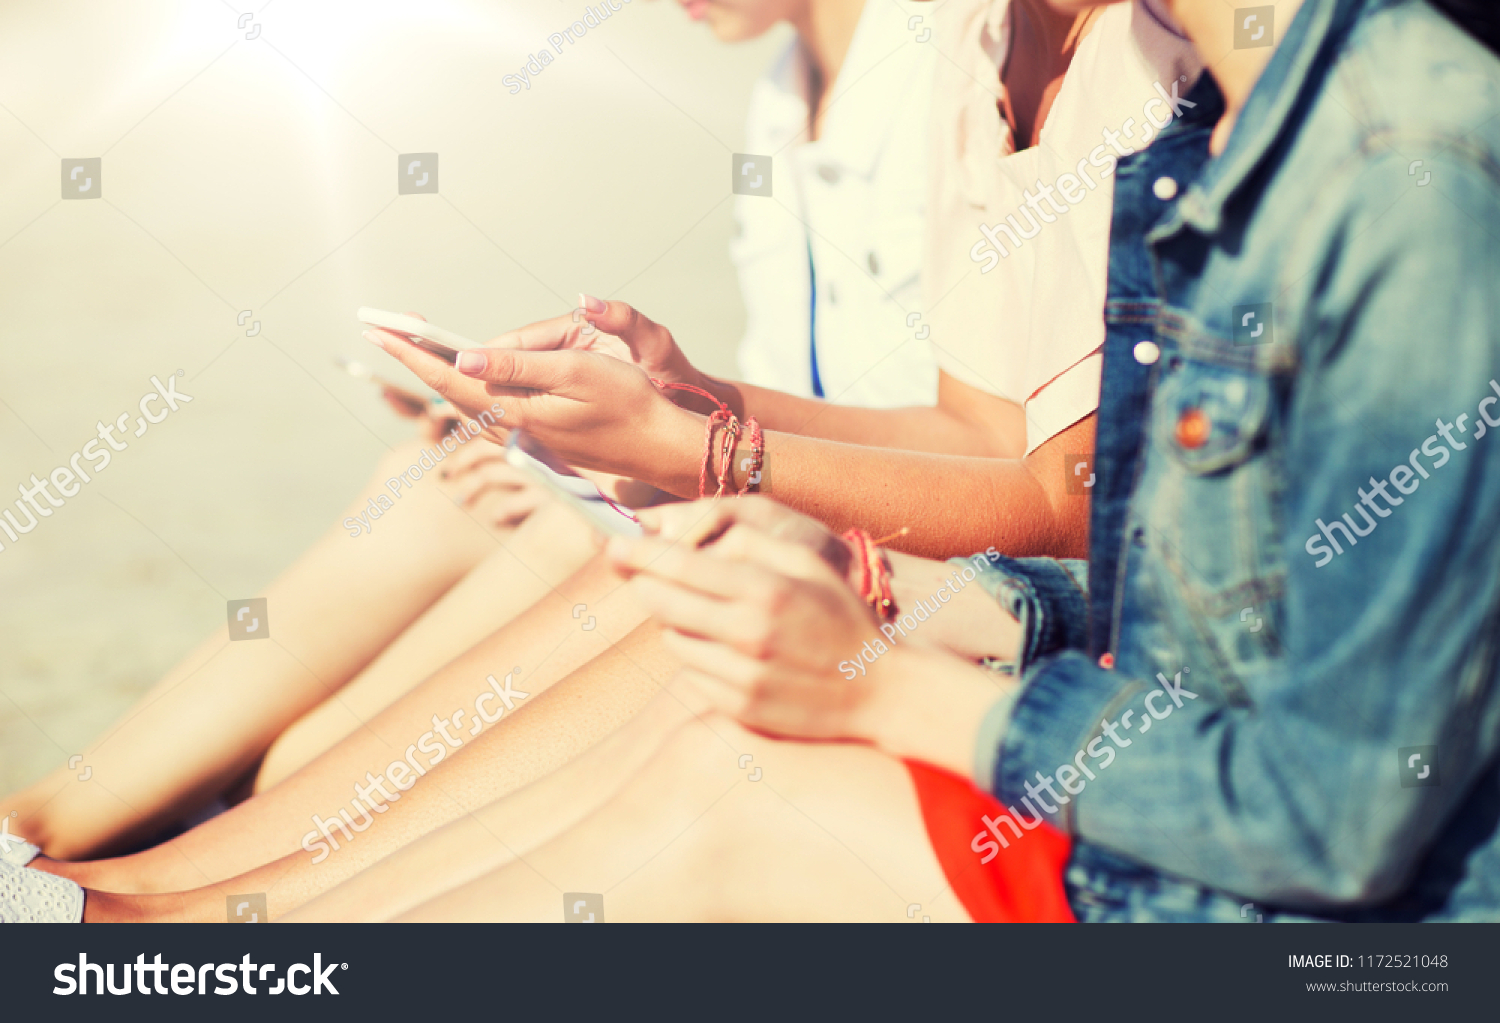 summer vacation, holidays, technology, travel and people concept - close up of young women with smartphones on beach #1172521048